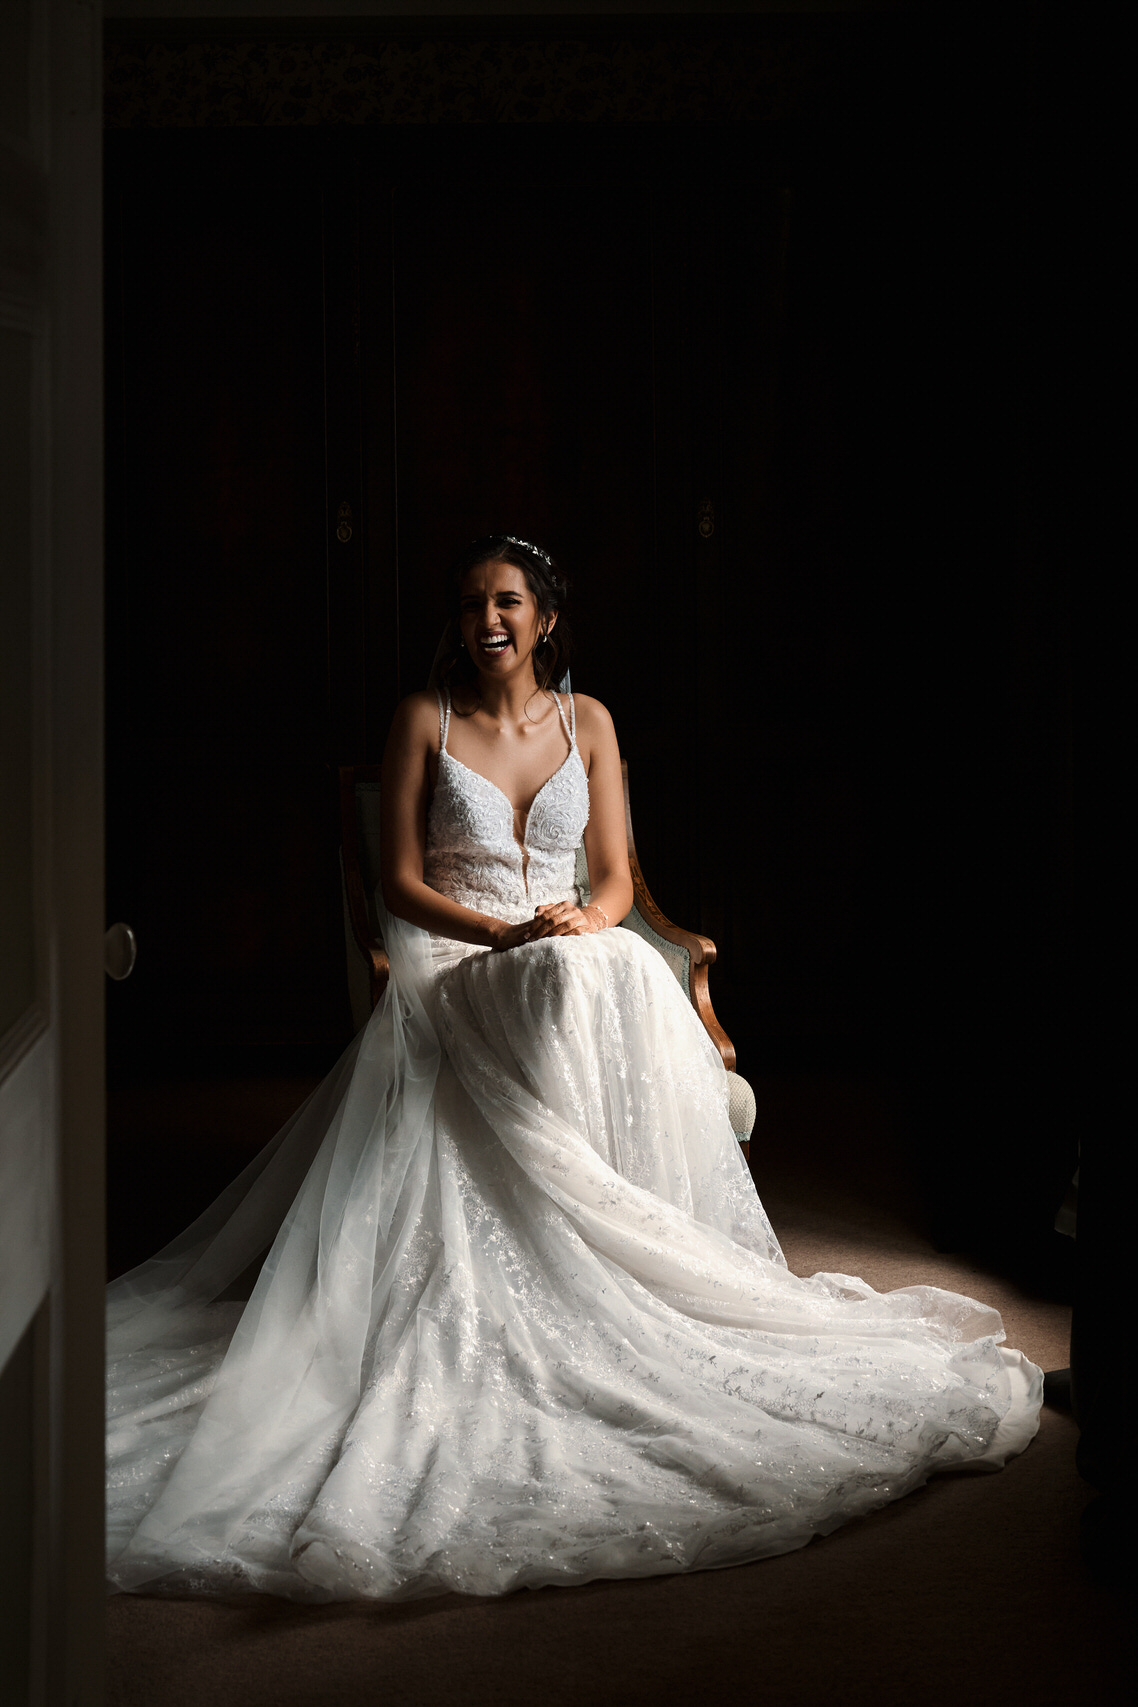 A woman in a wedding dress is sitting in a dimly lit room.